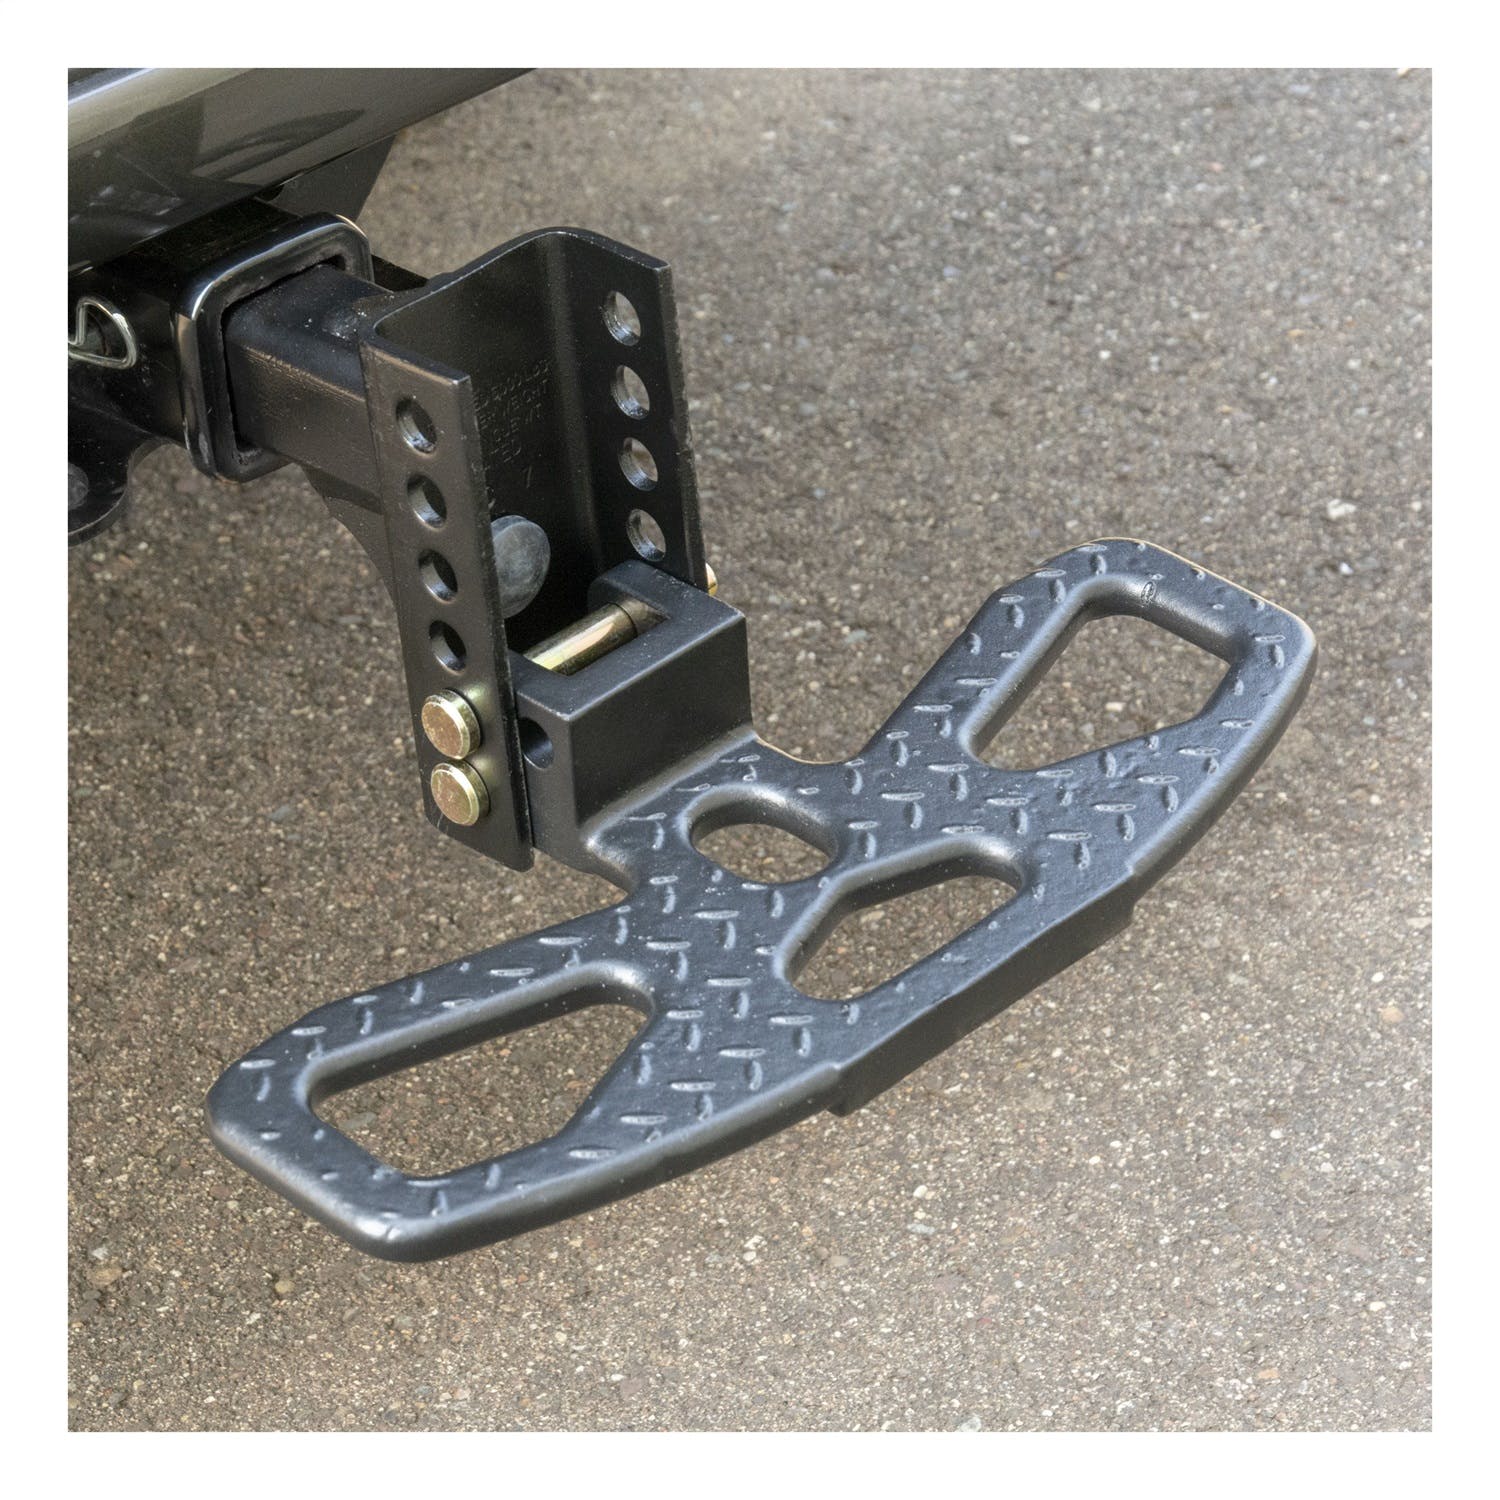 CURT 45909 Adjustable Channel Mount Hitch Step